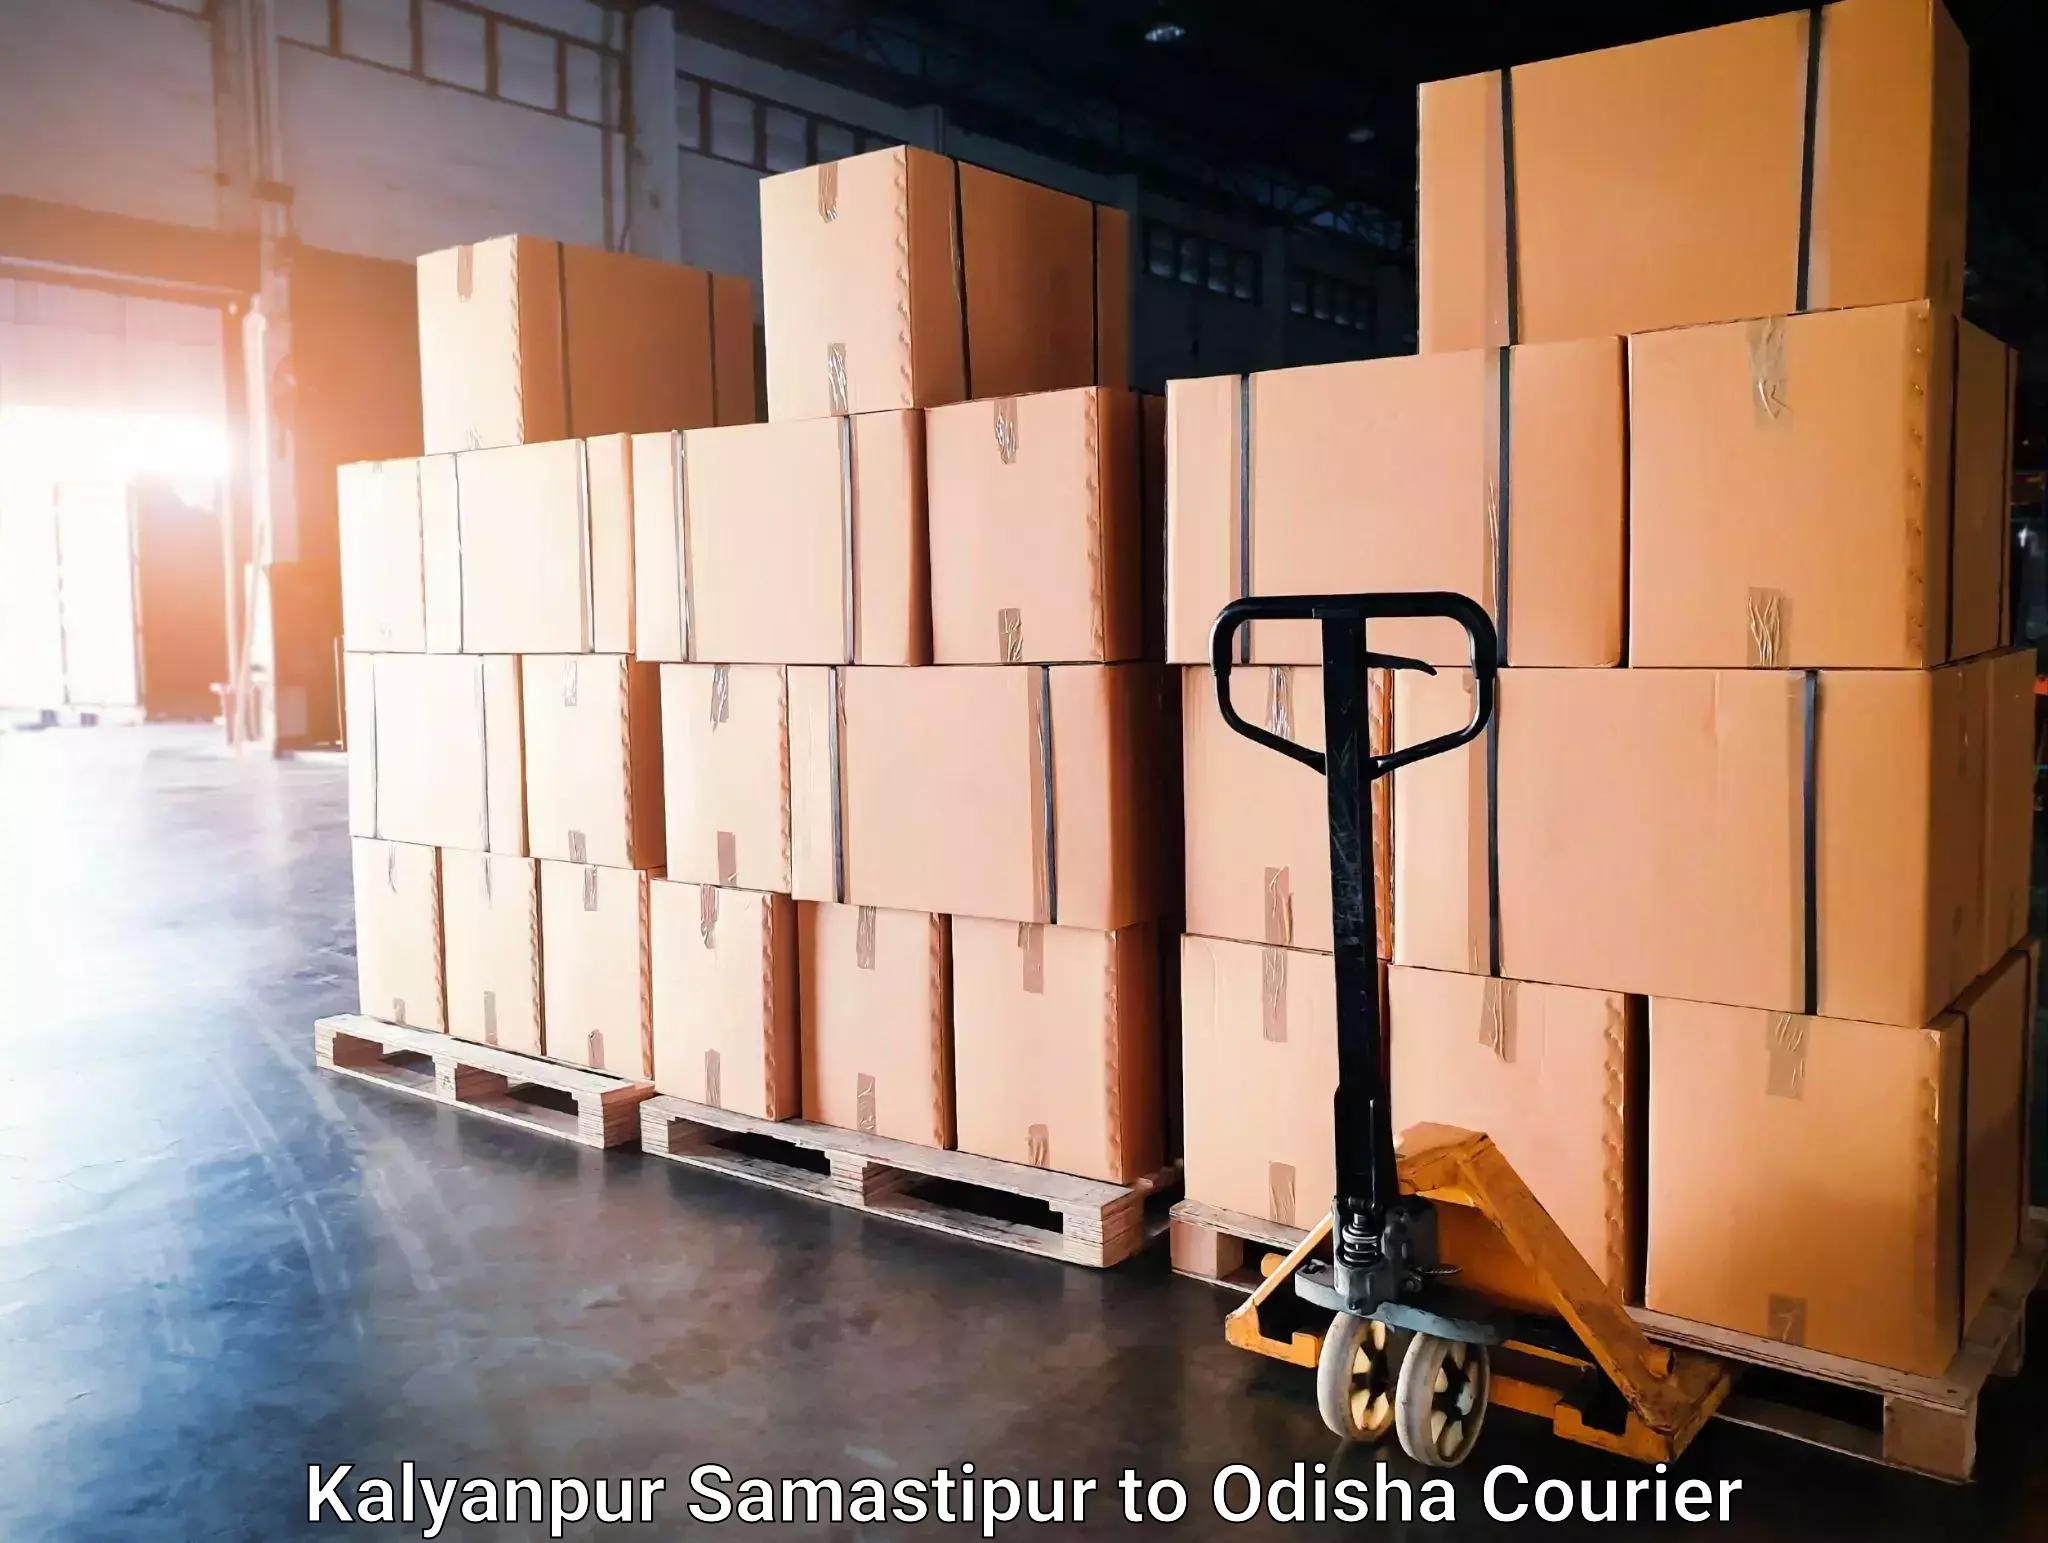 Trusted relocation experts Kalyanpur Samastipur to Raighar